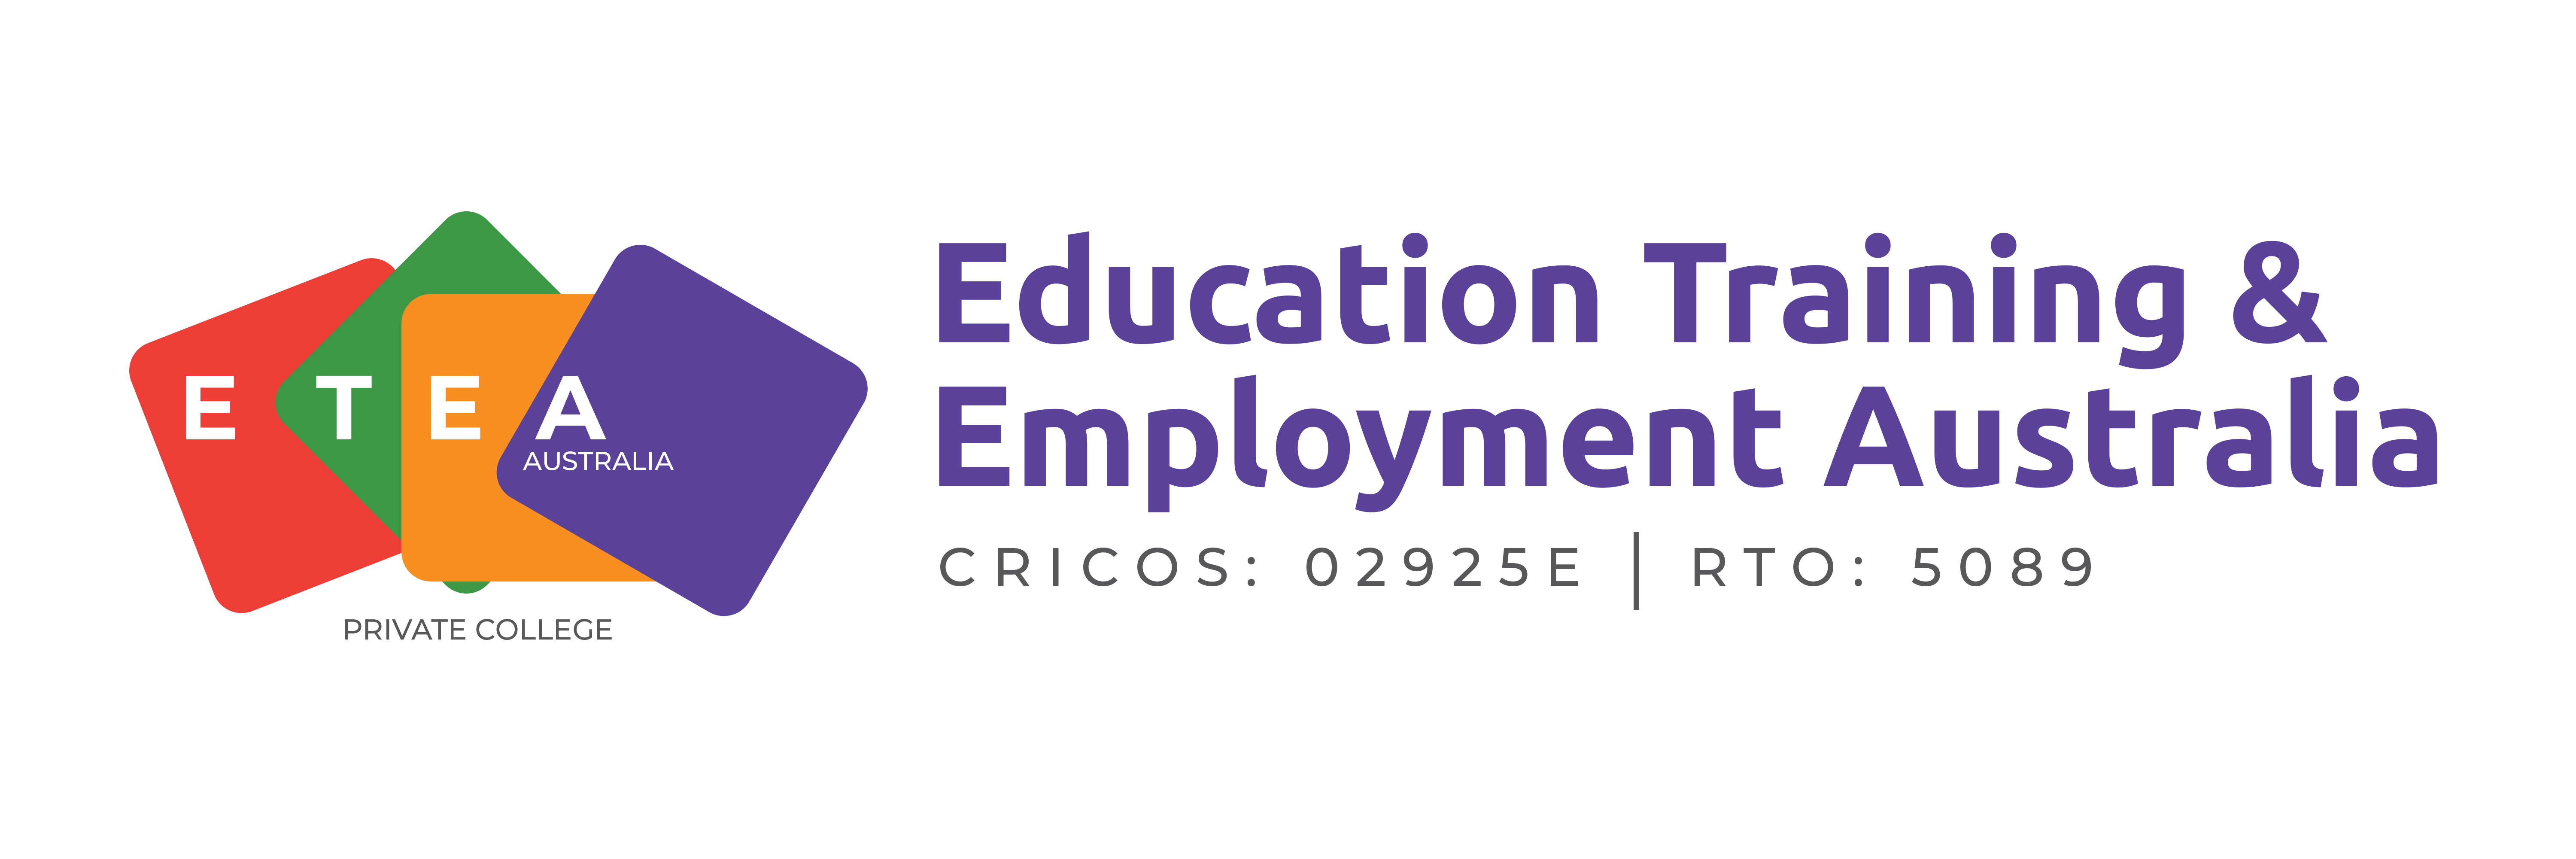 Student Information - Education Training and Employment Australia